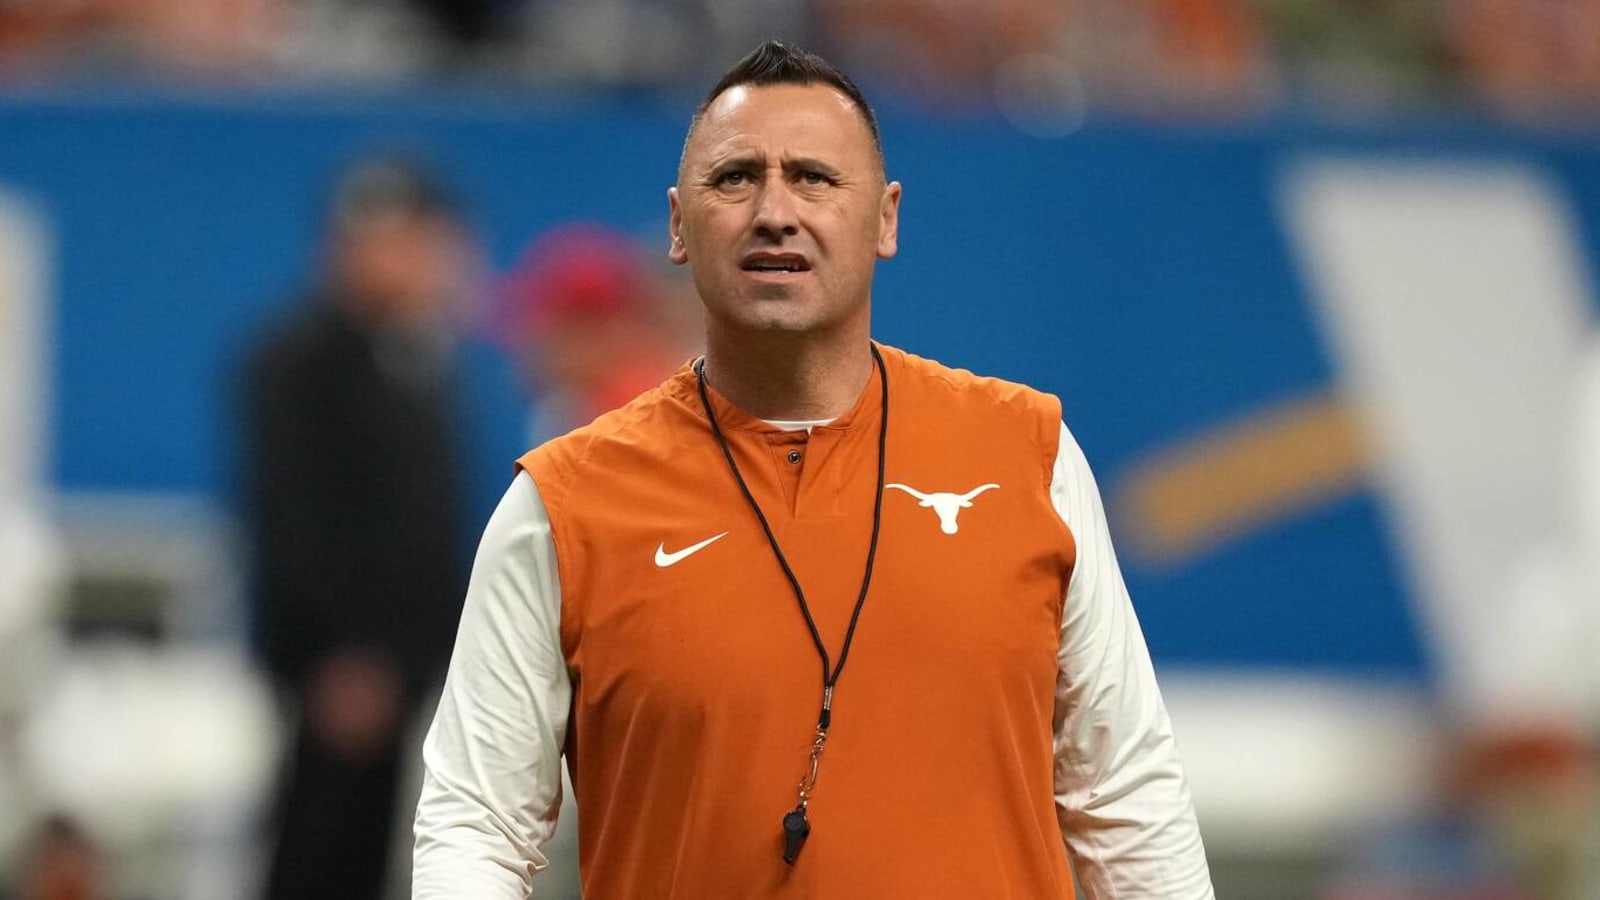 Texas 'on a mission' in Big 12 ahead of move to SEC